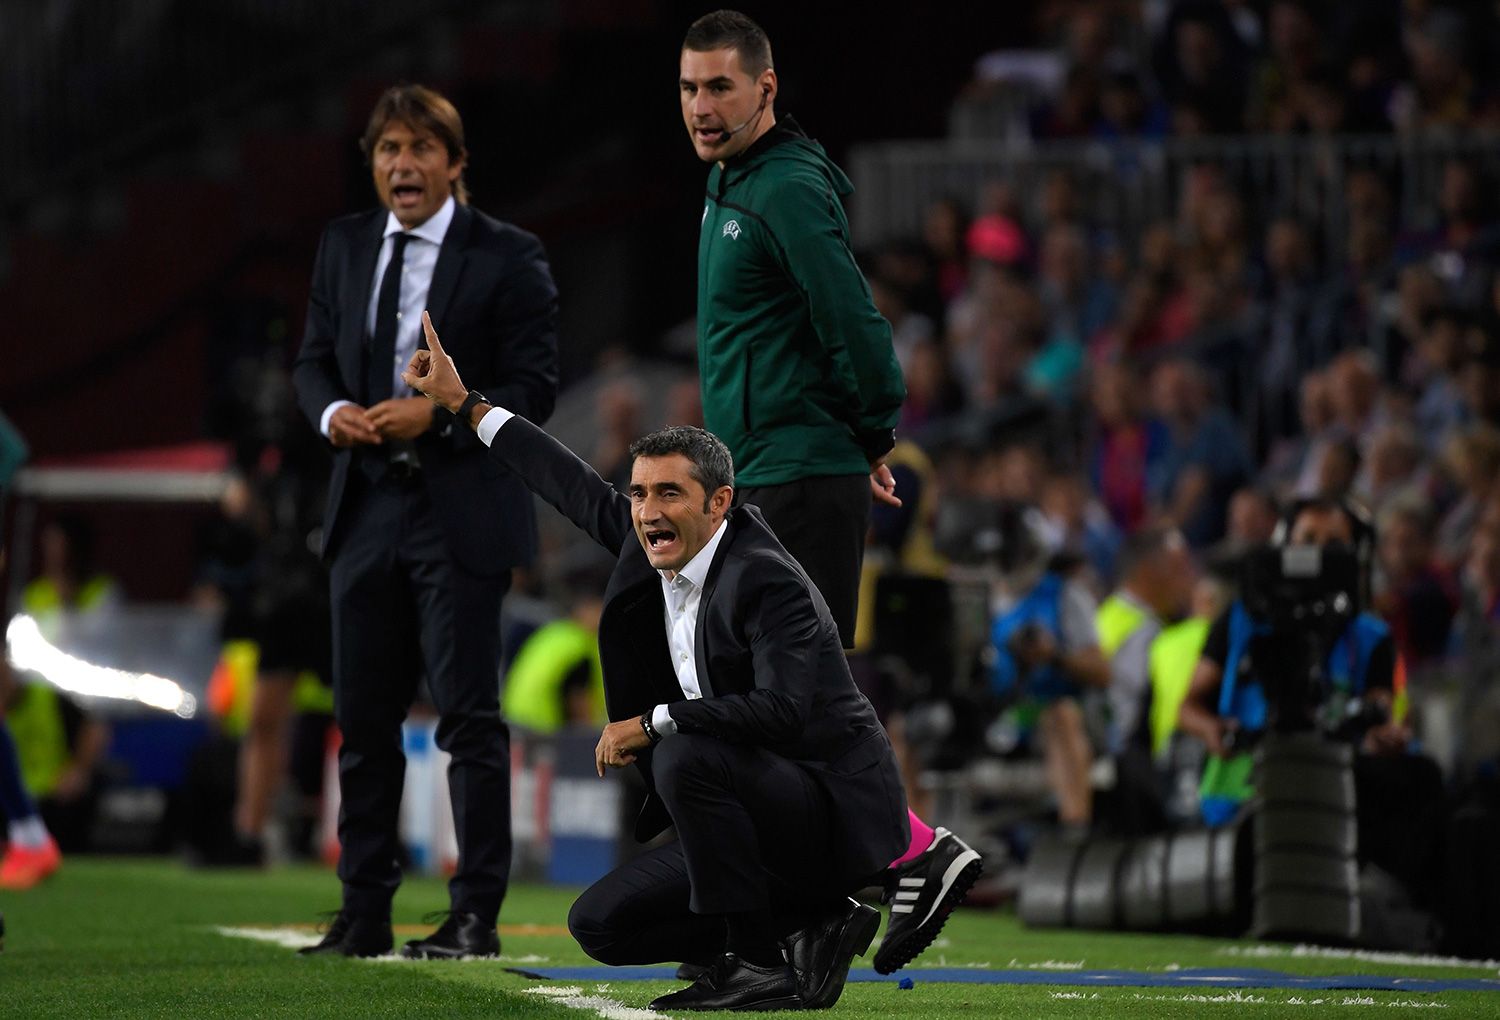 Valverde Gives instructions to his players